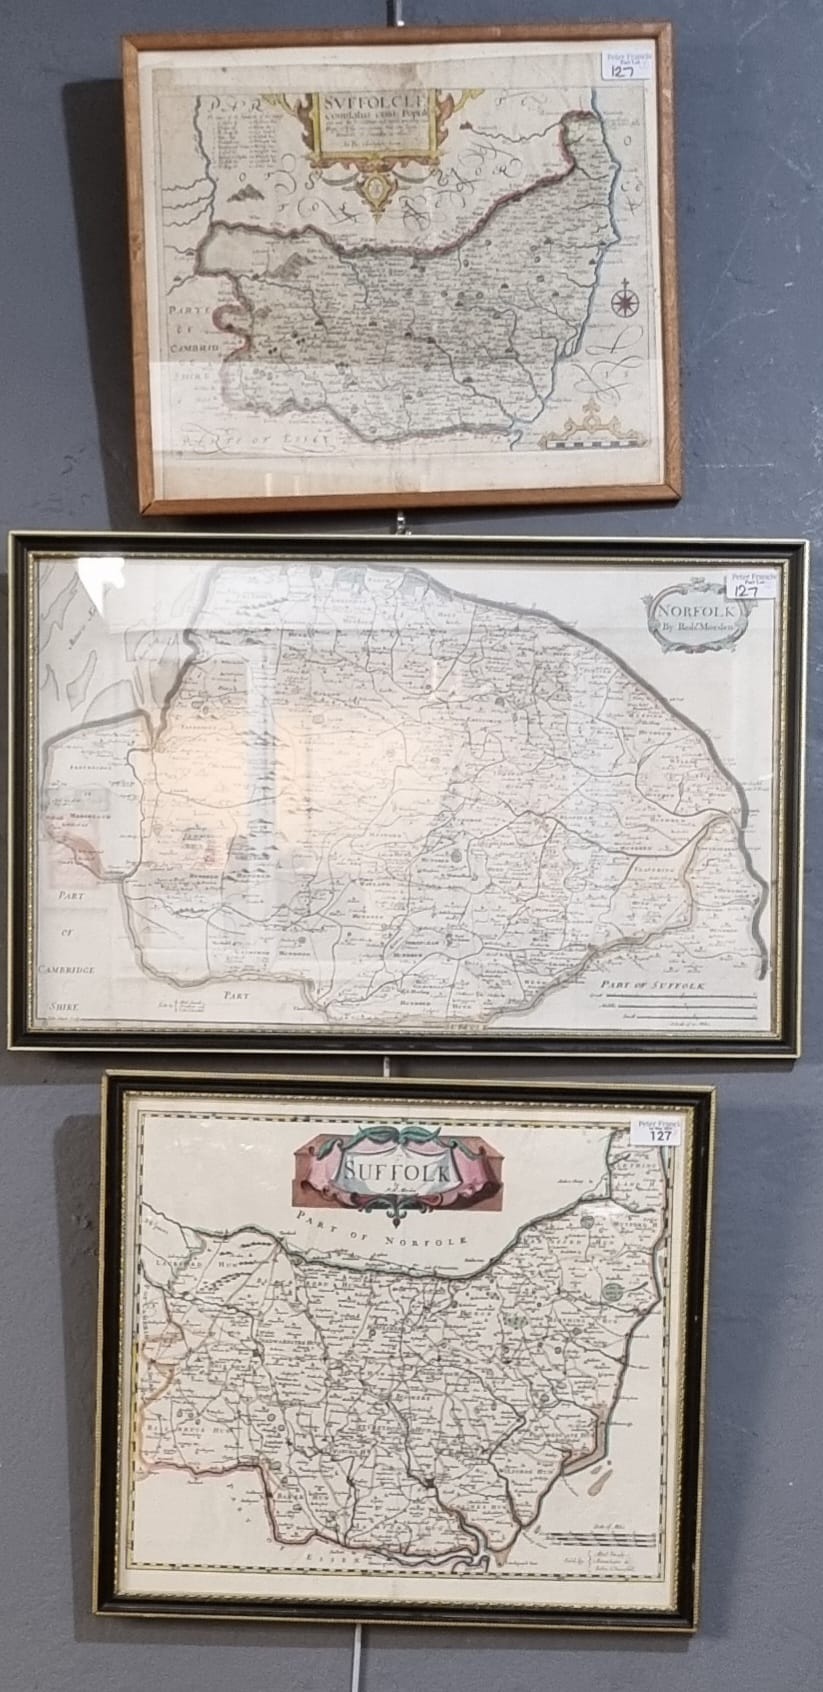 Robert Morden, original map of Suffolk and another similar, Norfolk, together with Christopher